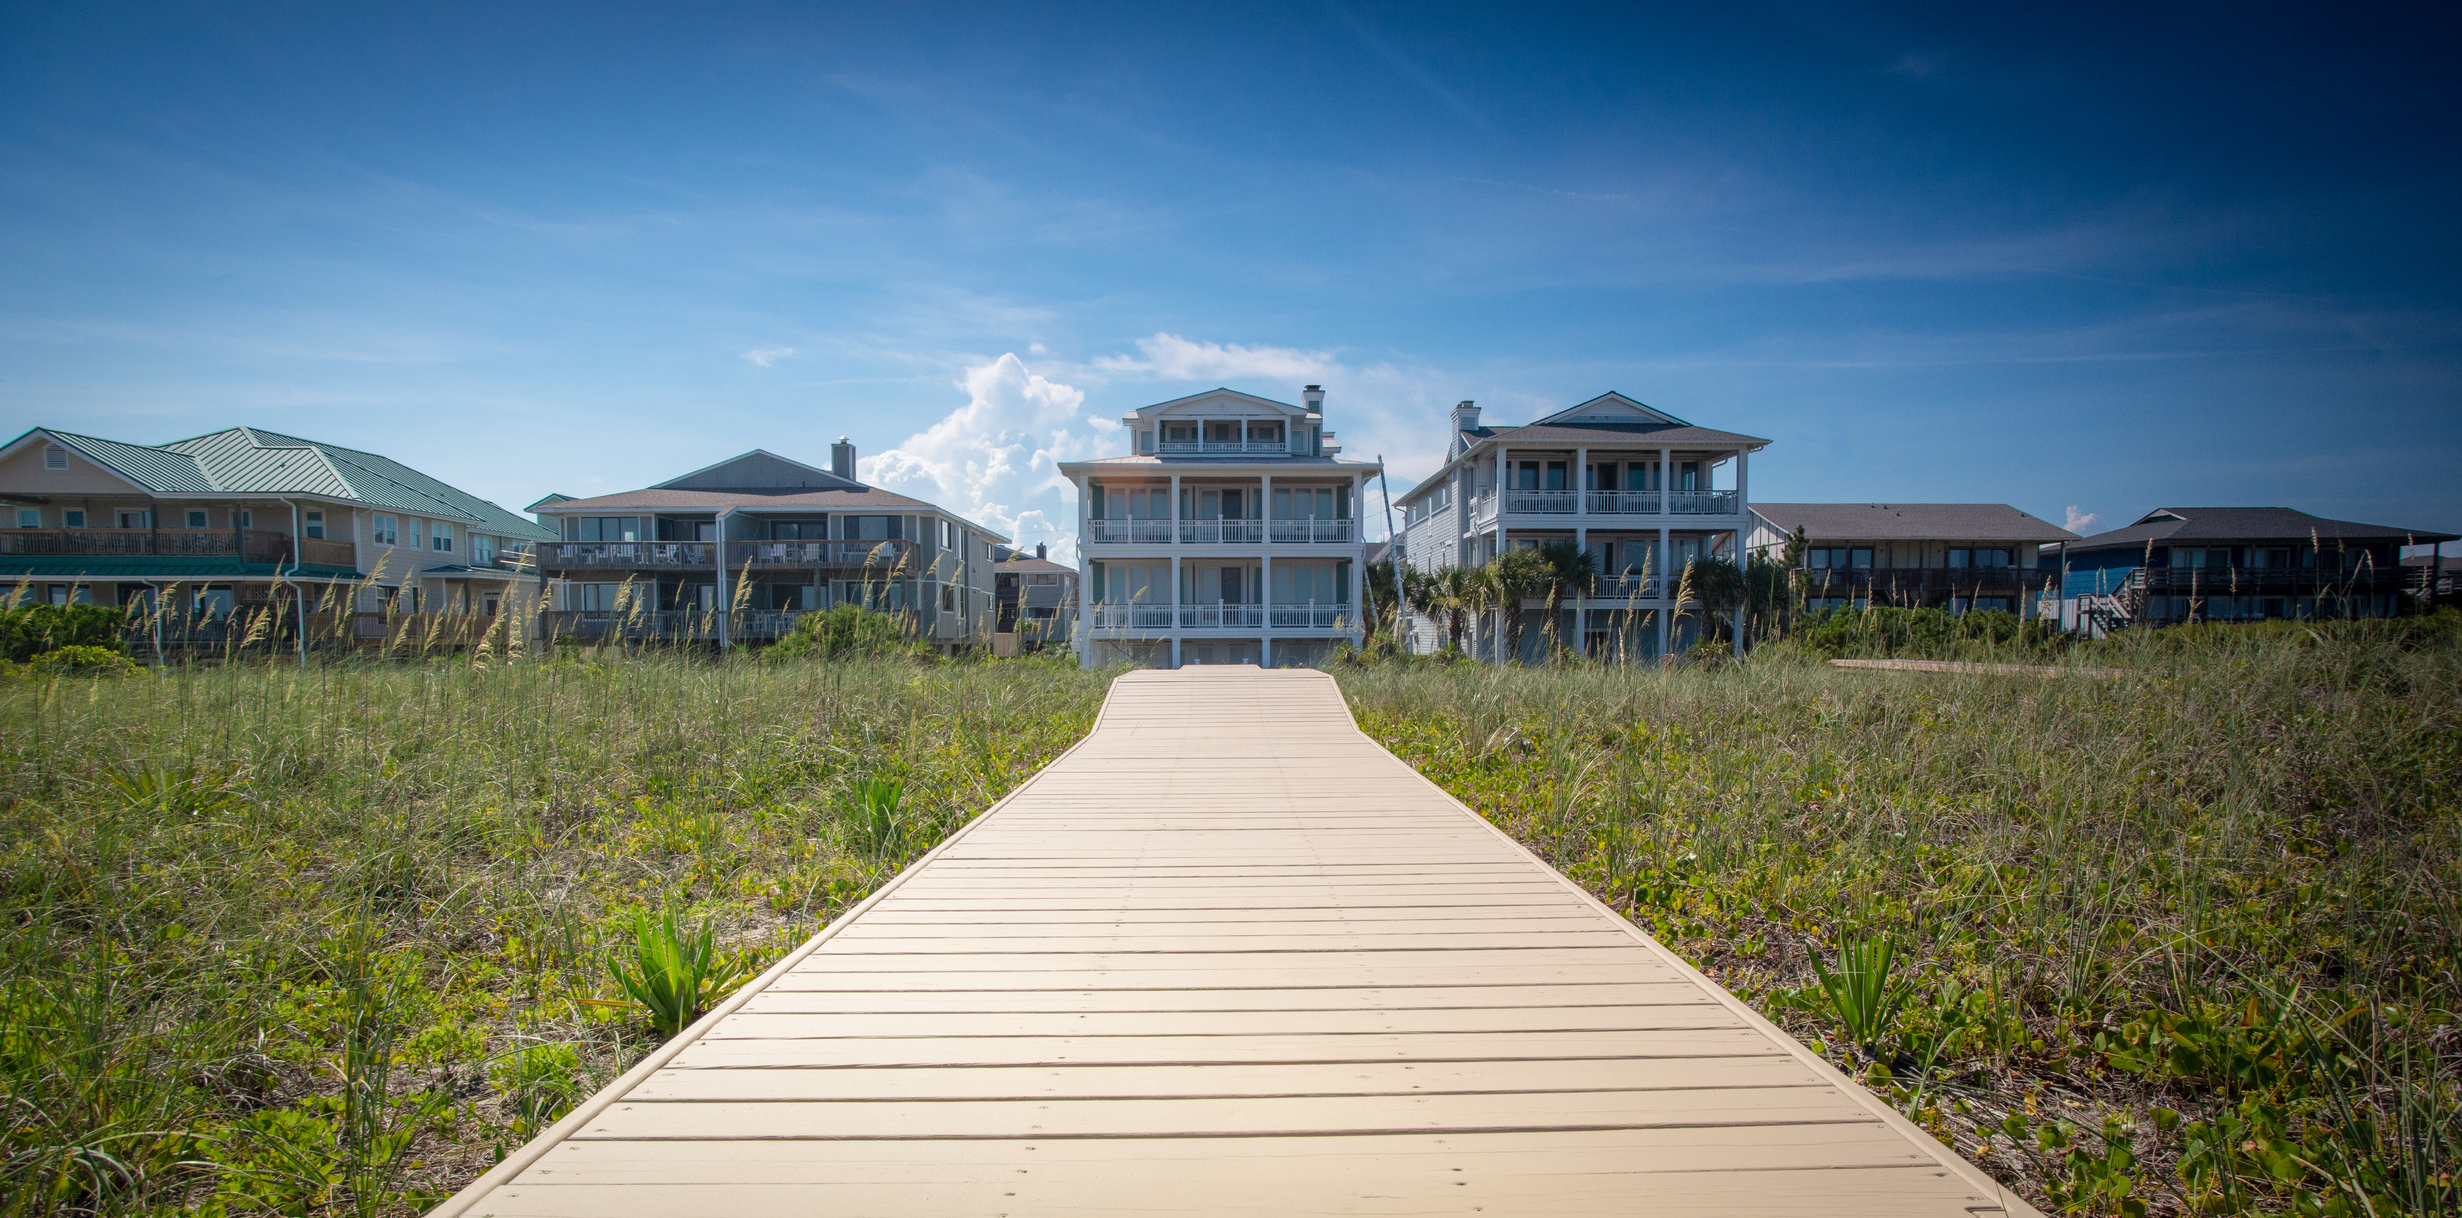 A long wood plank walkway leads to a large beach house.